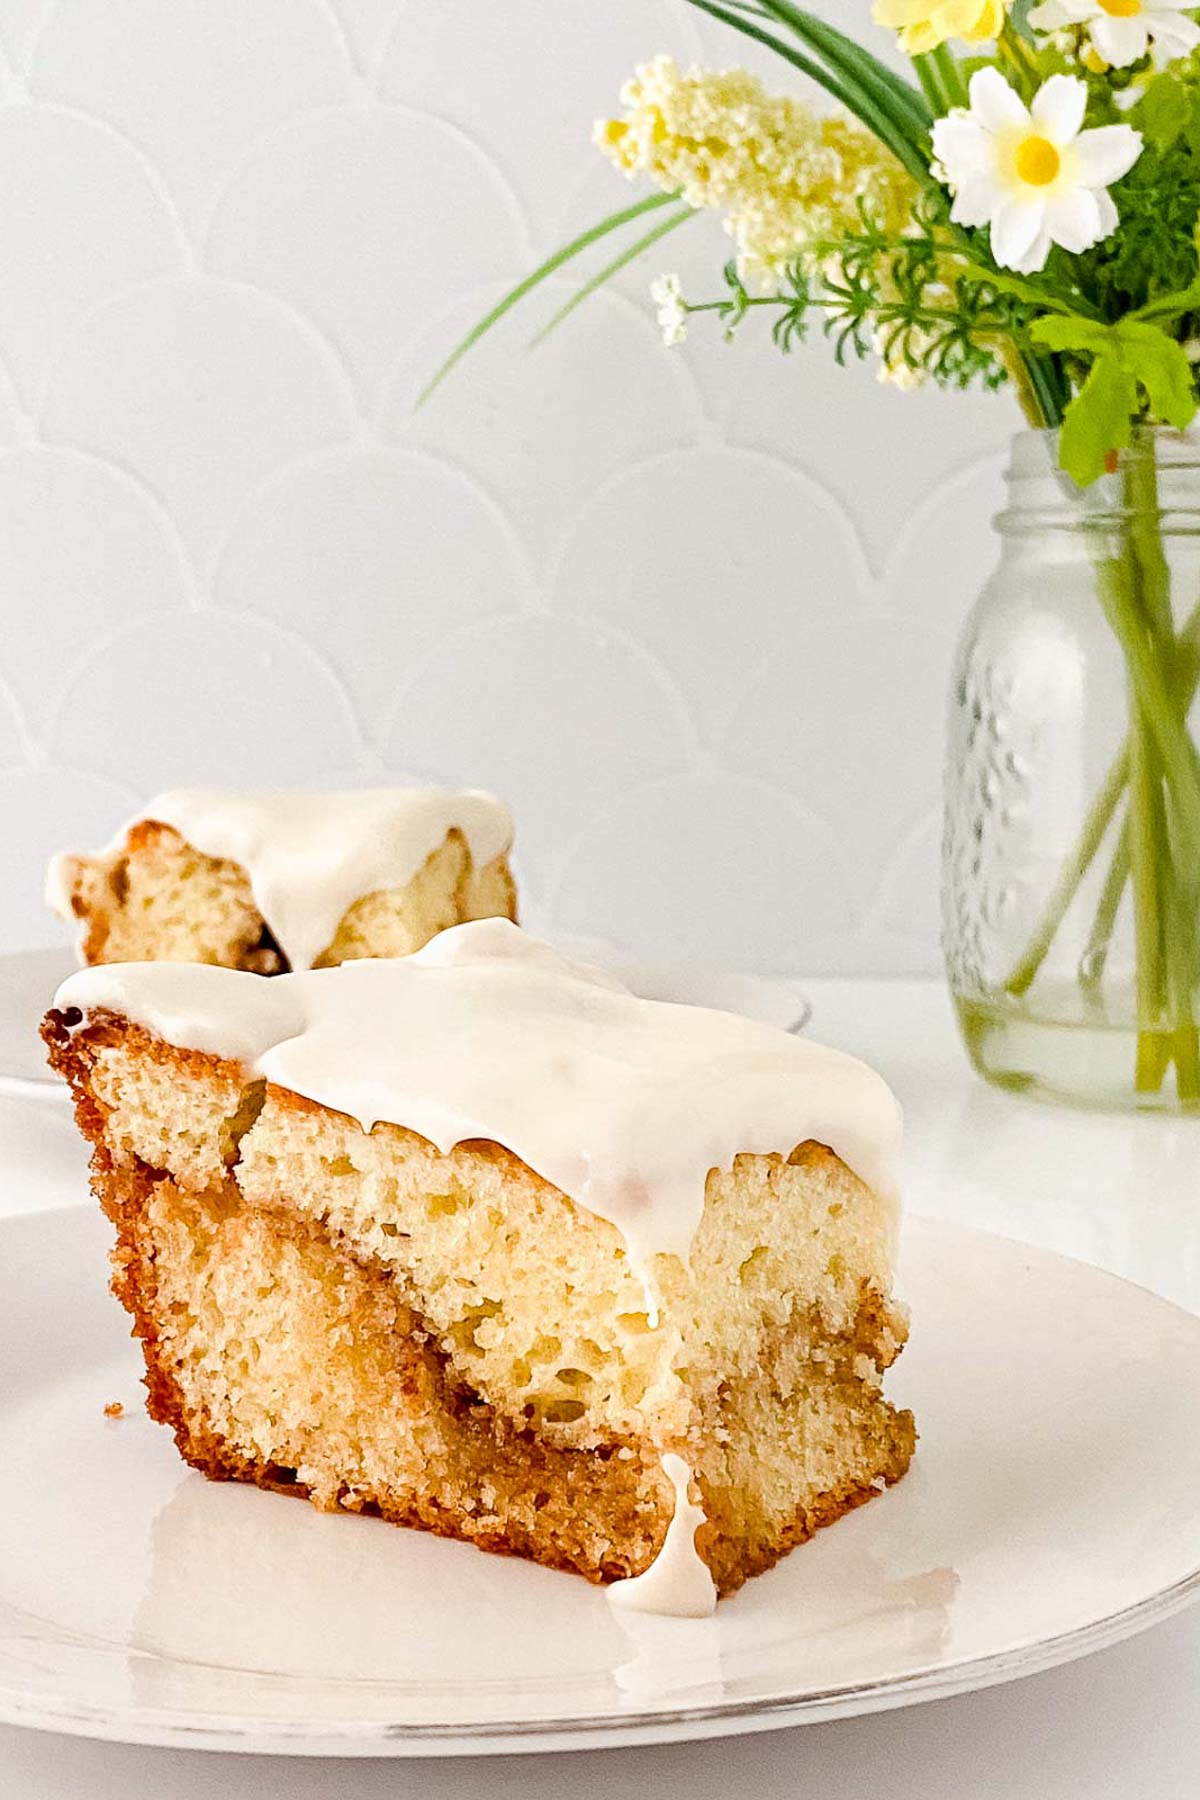 A slice of honey bun cake with creamy icing on a white plate, background featuring a jar of yellow and white flowers.